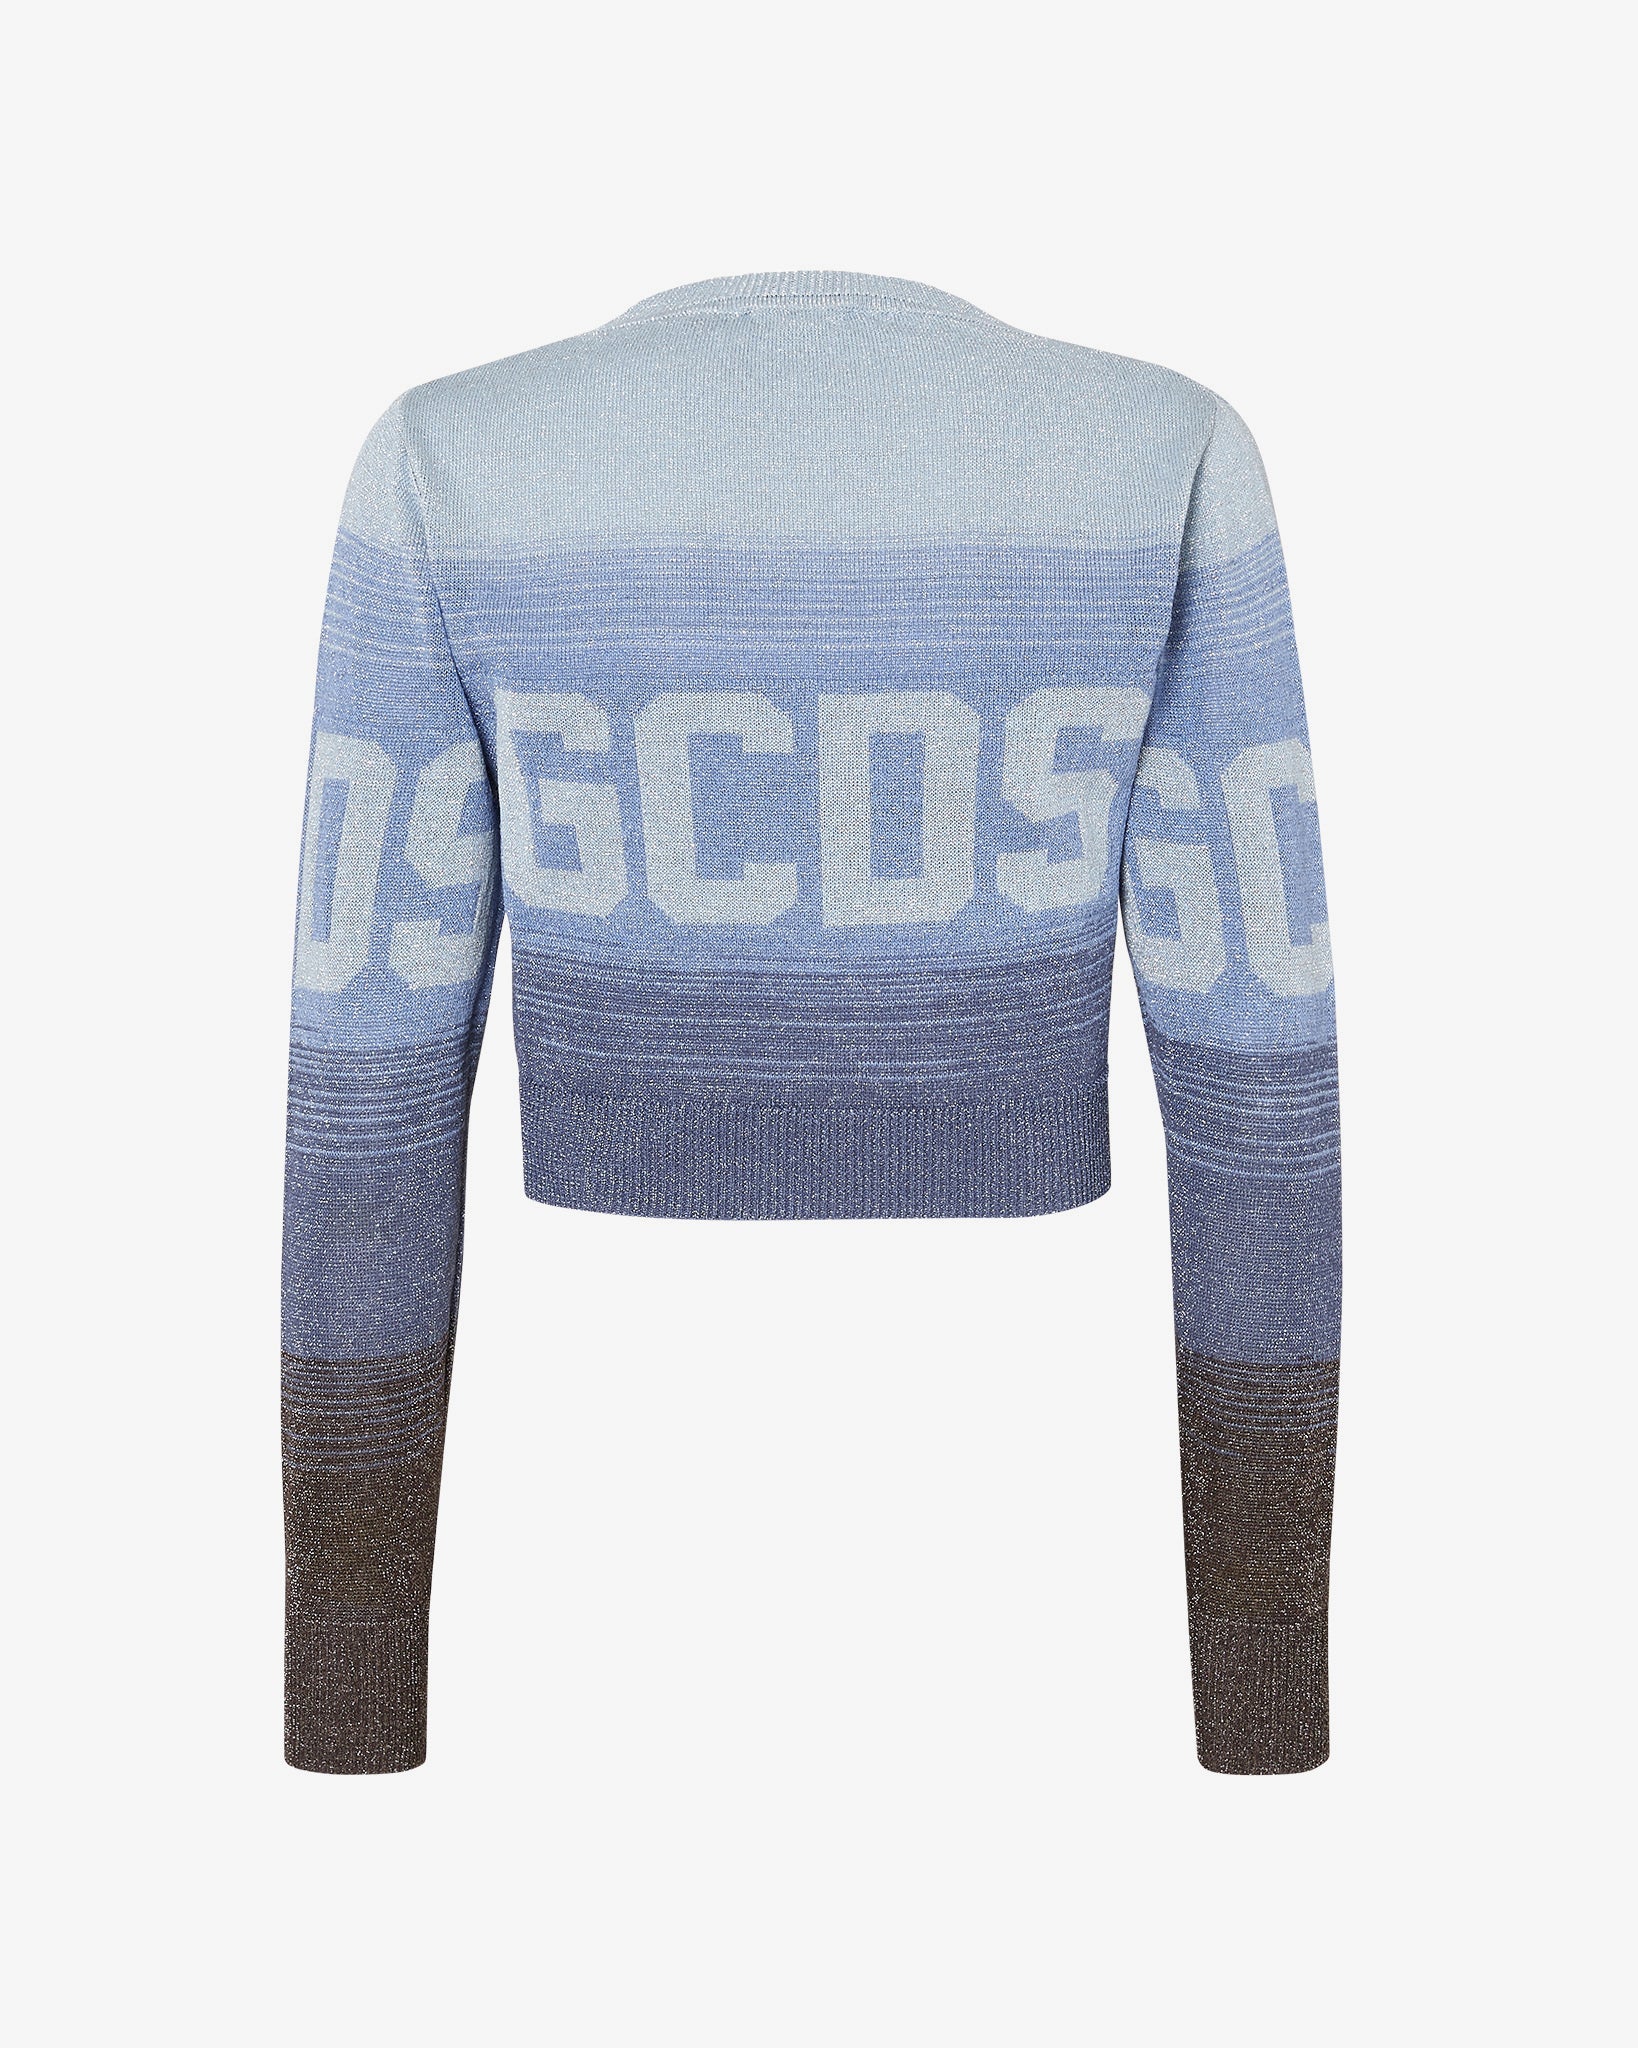 Women's Lurex And Logoed Pullover by Gcds